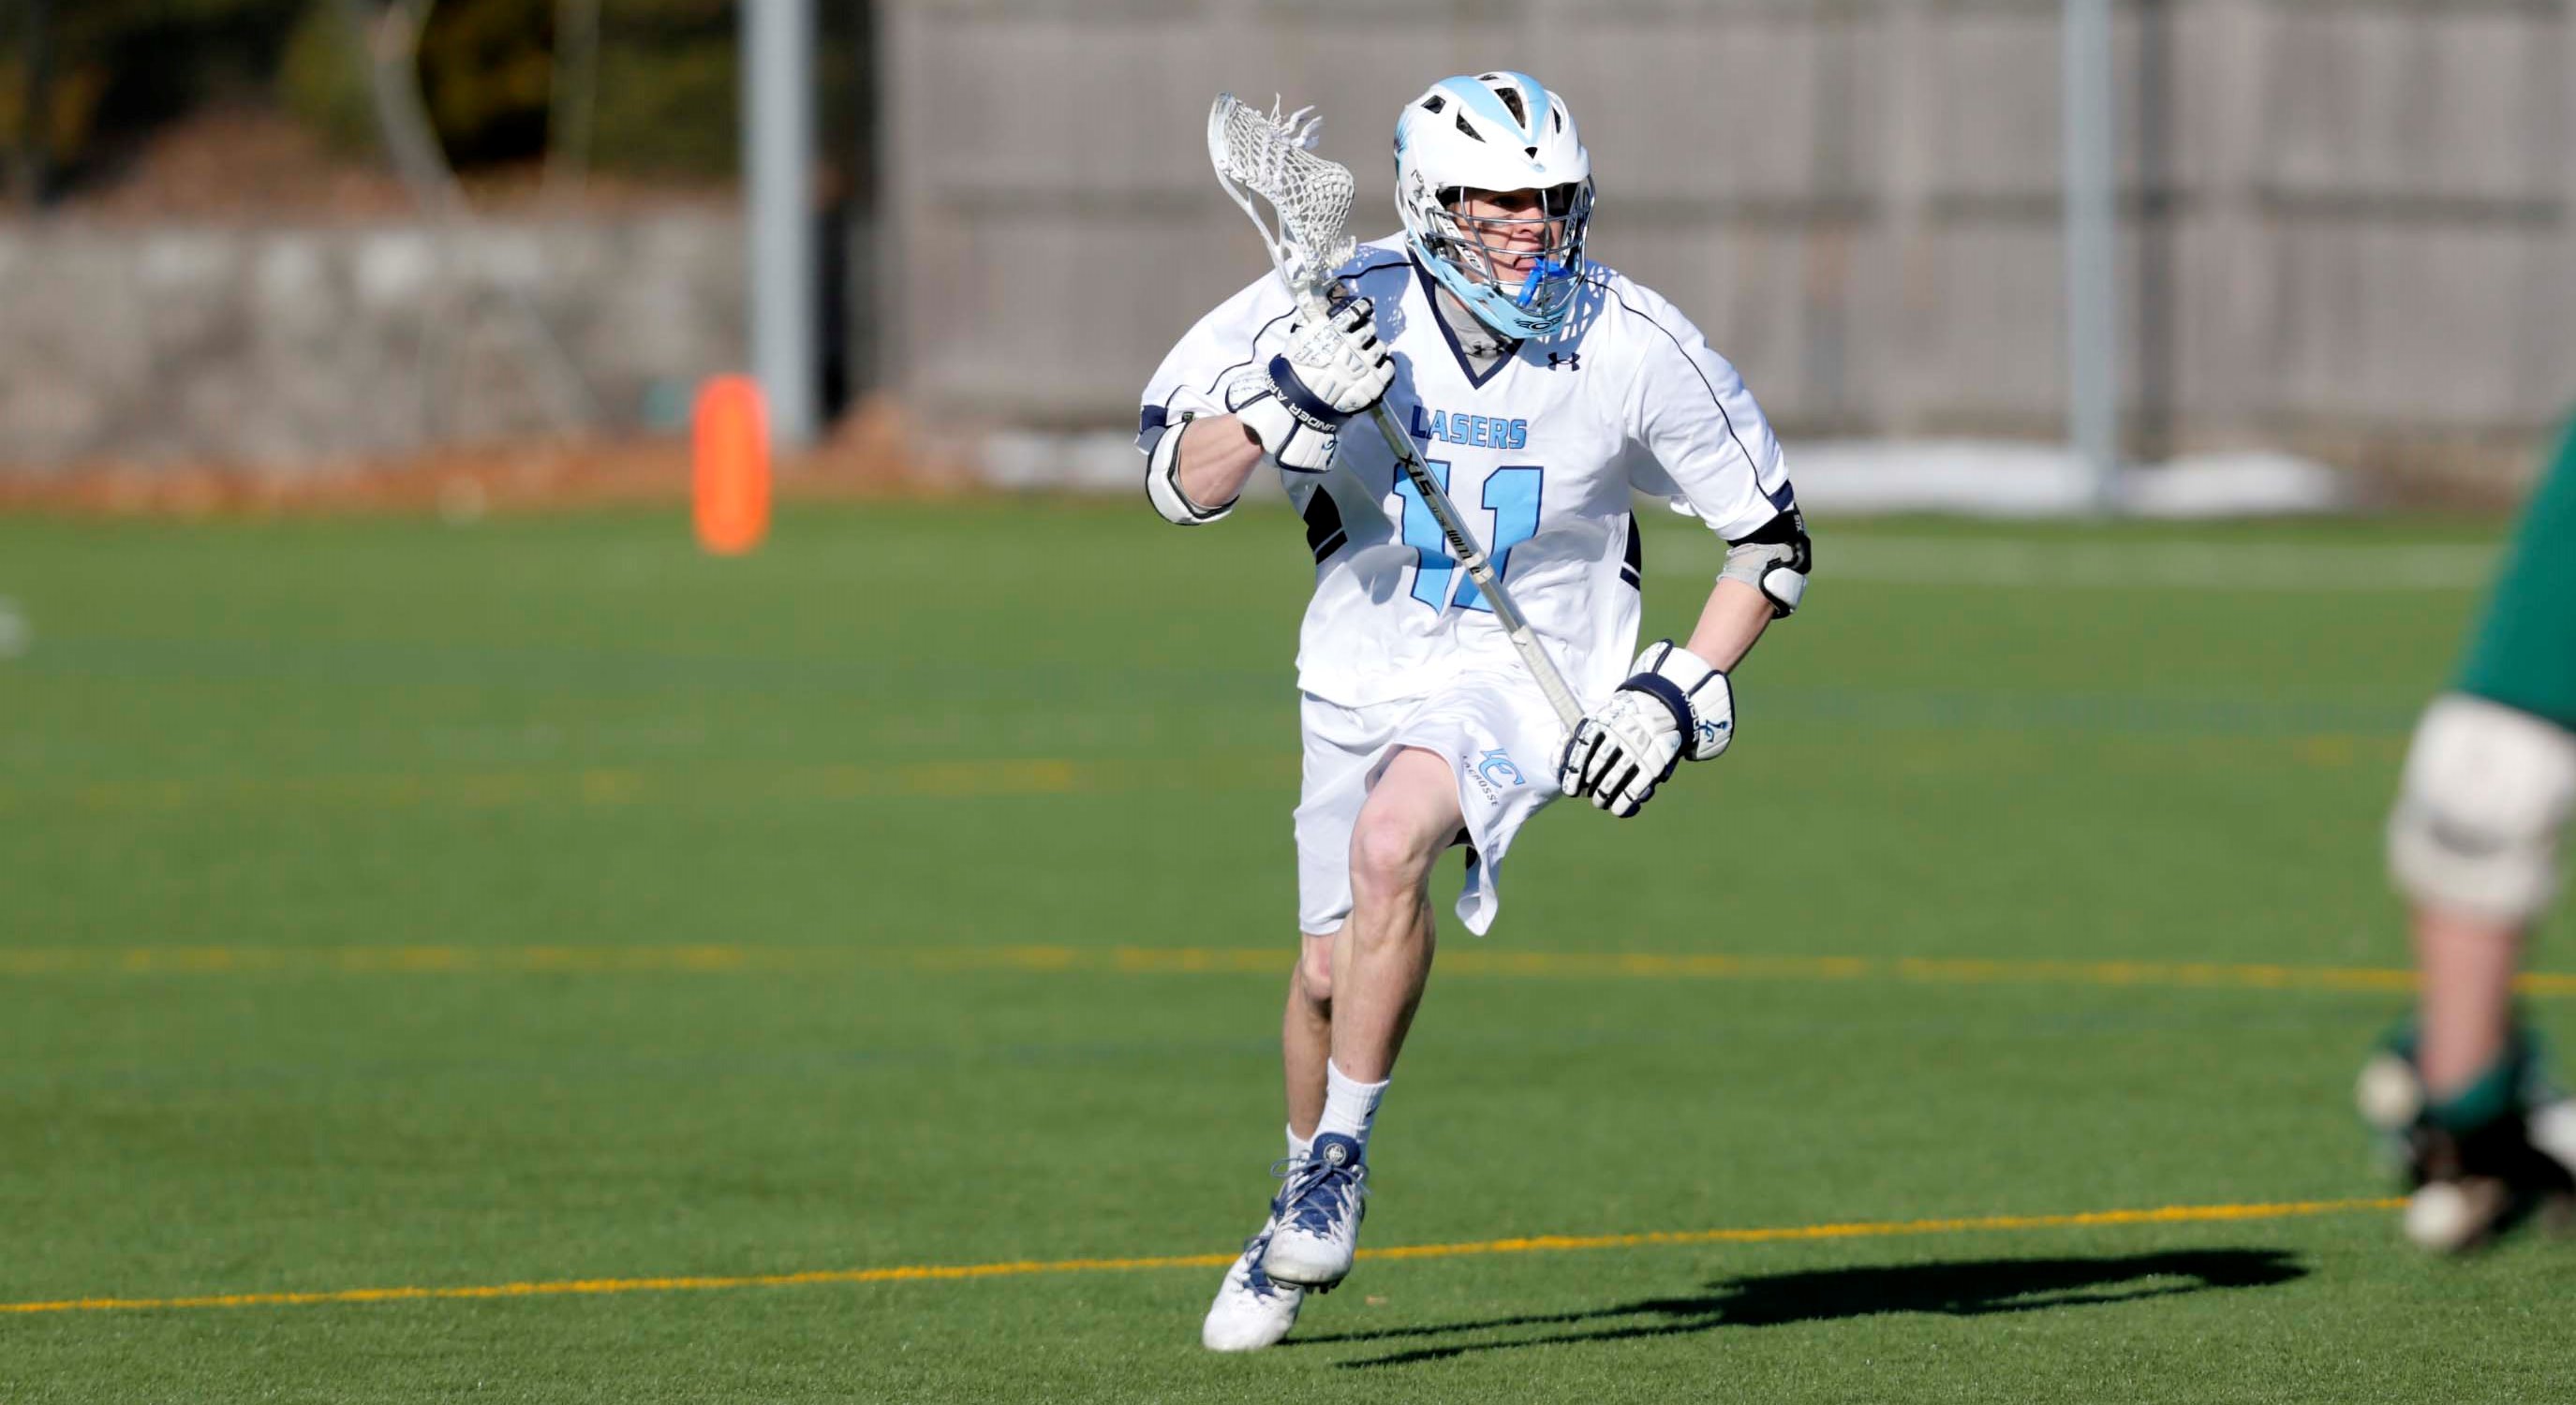 Men's Lacrosse Staves off Anna Maria Upset Bid with 13-9 Win